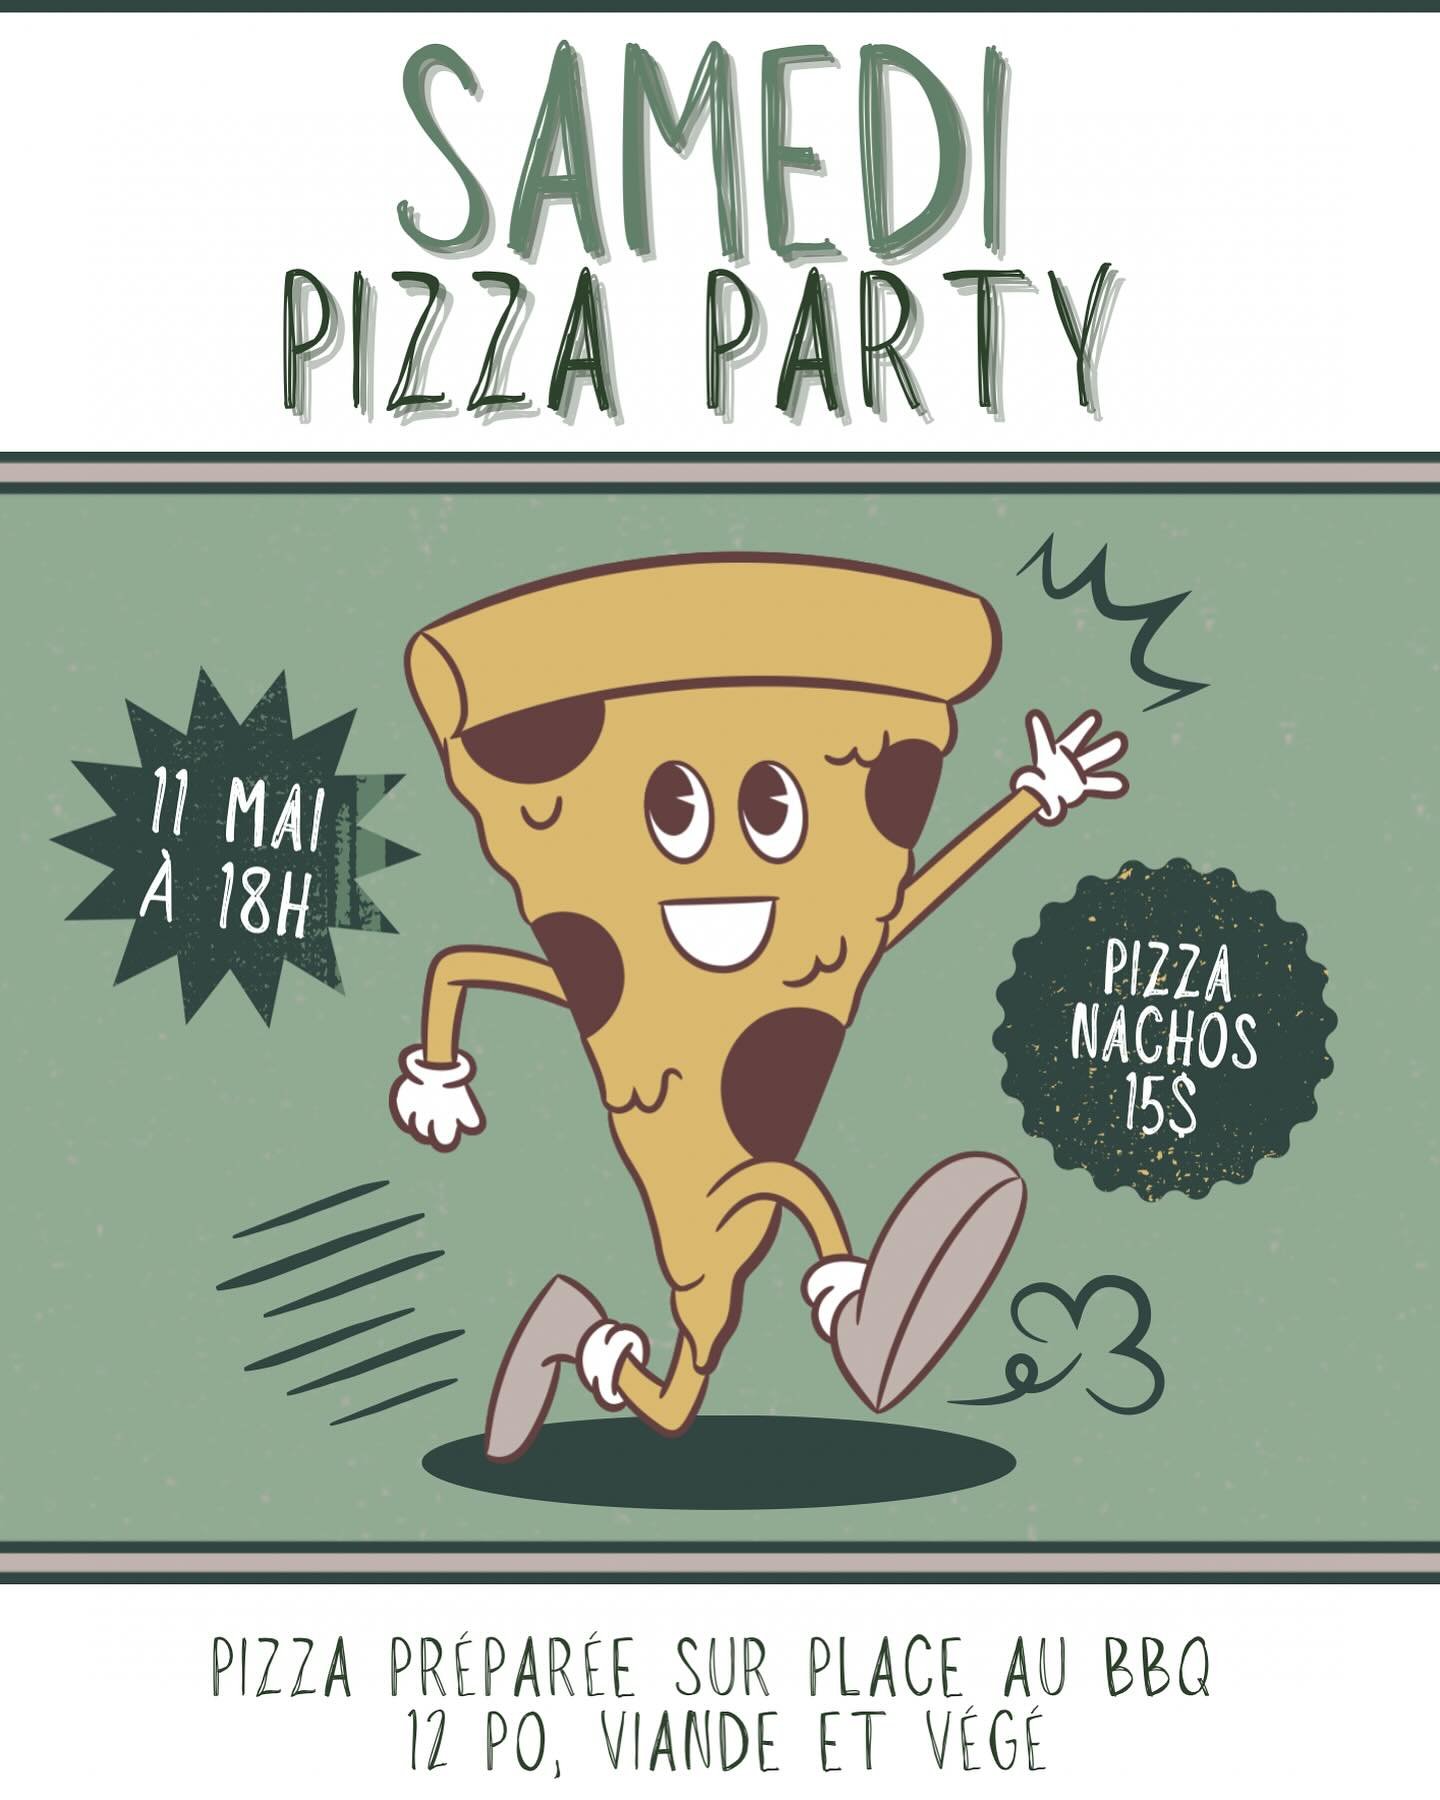 PIZZA &amp; NACHOS 🍕 
SATURDAY MAY 11th! 
6pm &mdash; 15$ 
Pizza made on site in a BBQ pizza oven! 🤤
&mdash;